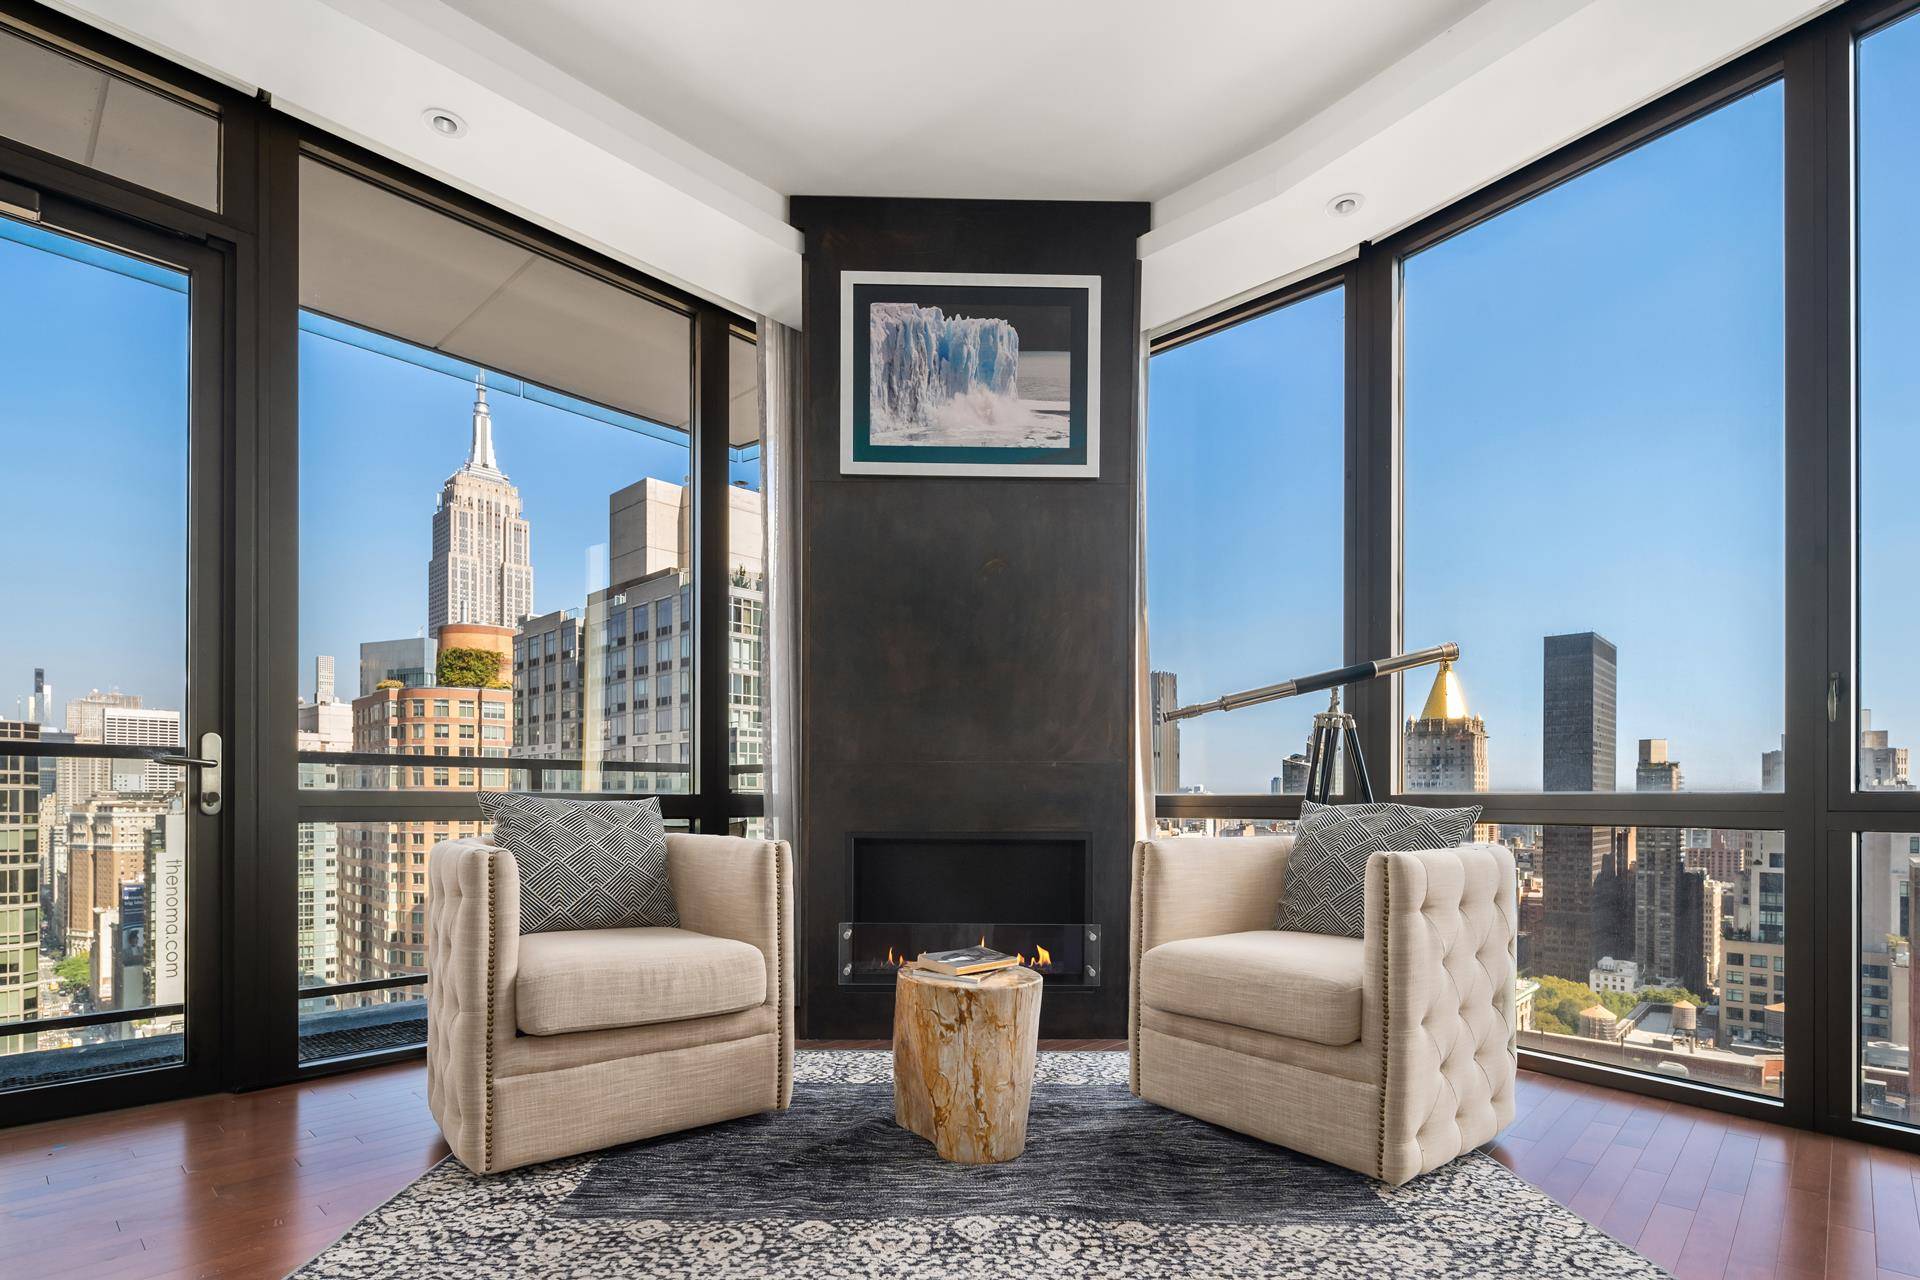 Welcome to 101 W 24th St 32E, where luxury living reaches new heights.